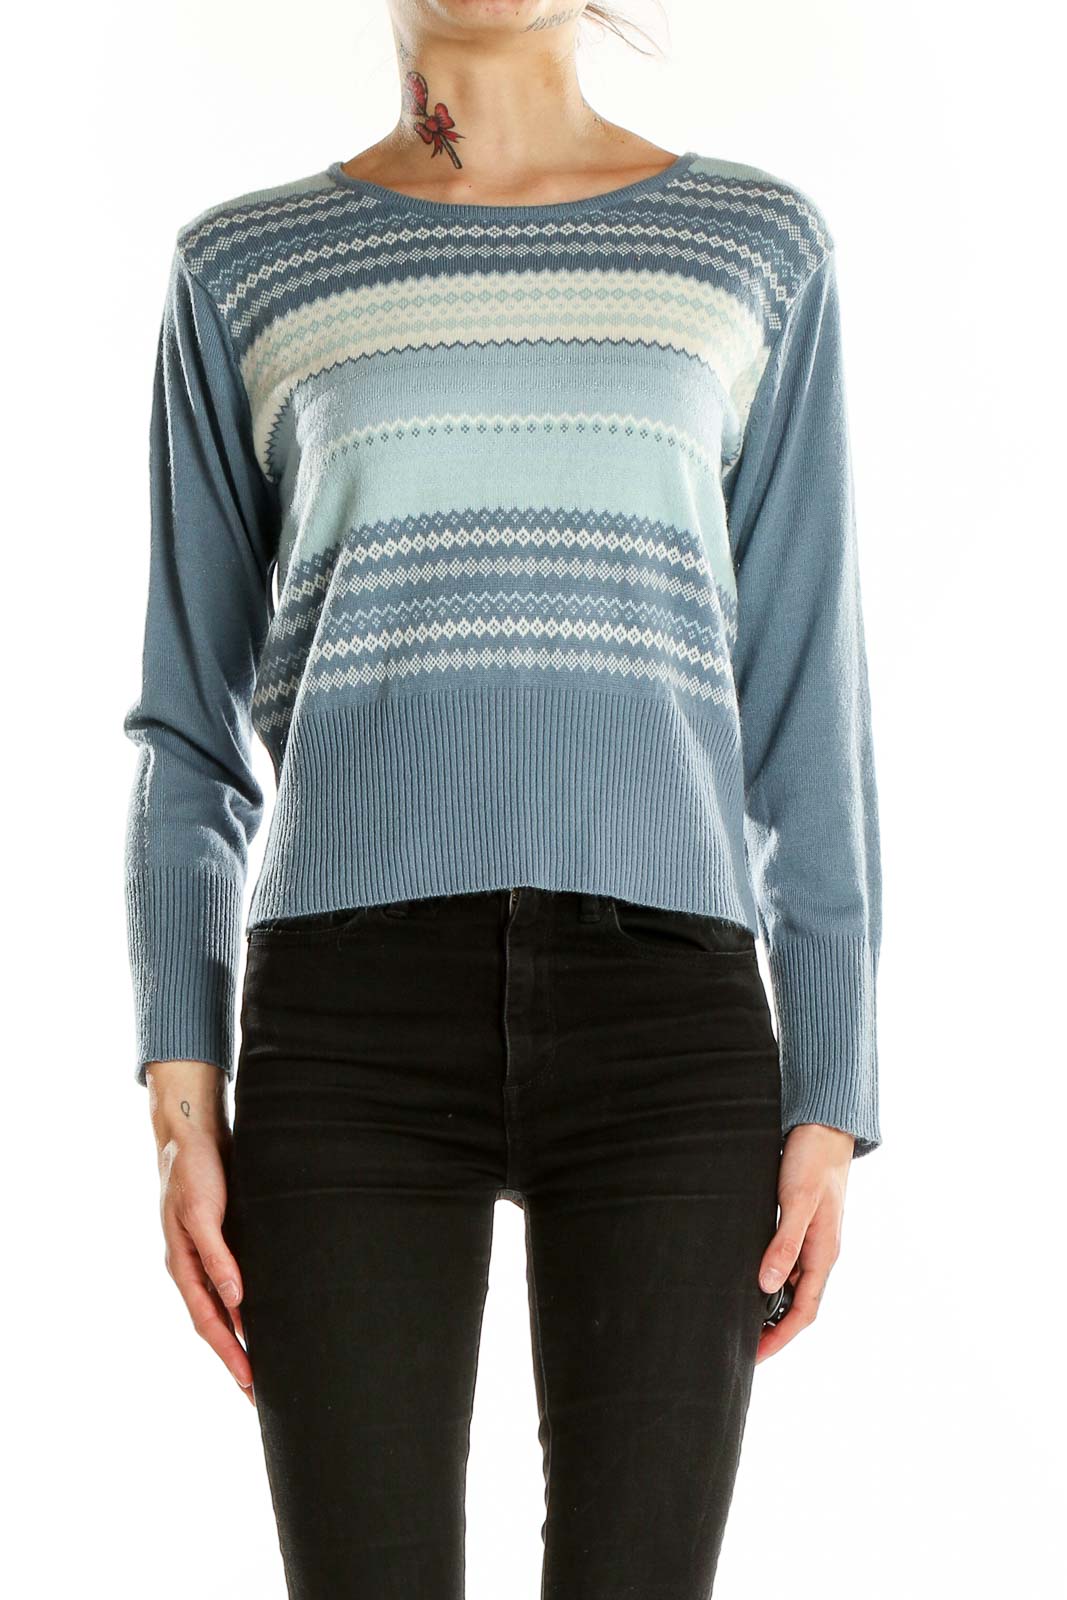 Blue Pritned Sweater Front